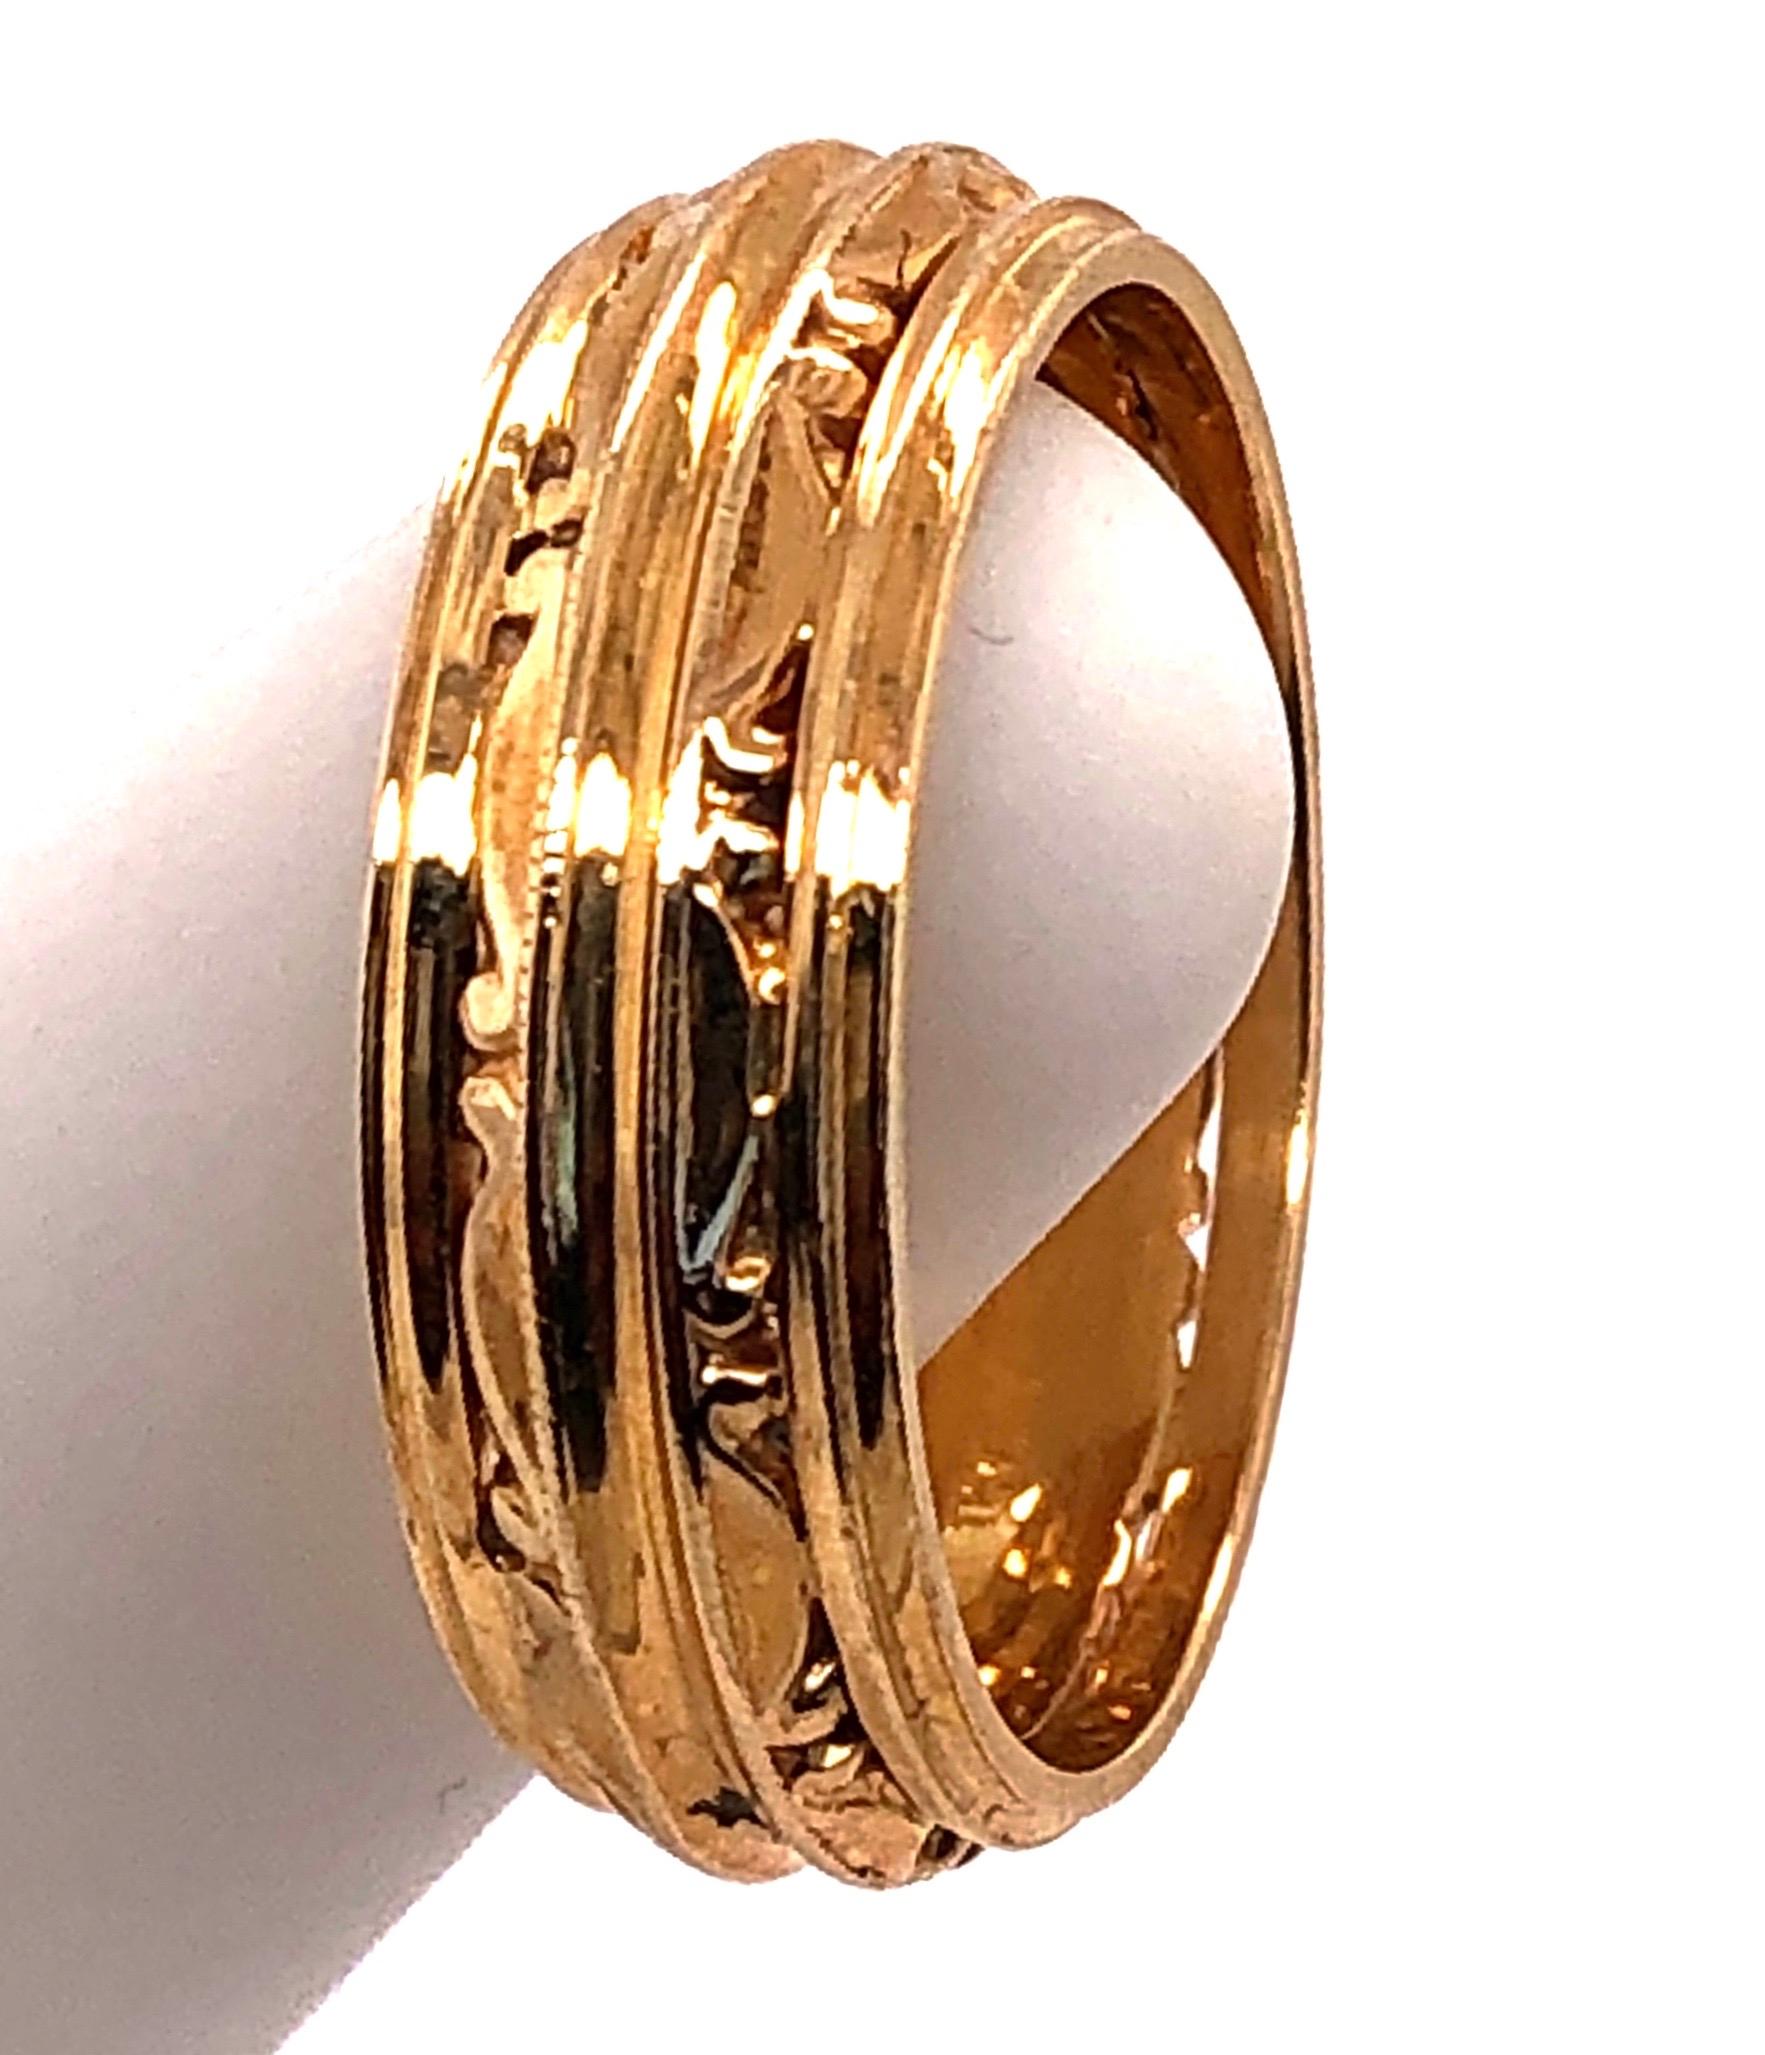 18Kt Yellow Gold Wedding Ring/Band.
Size 7 with 6.49 grams total weight.